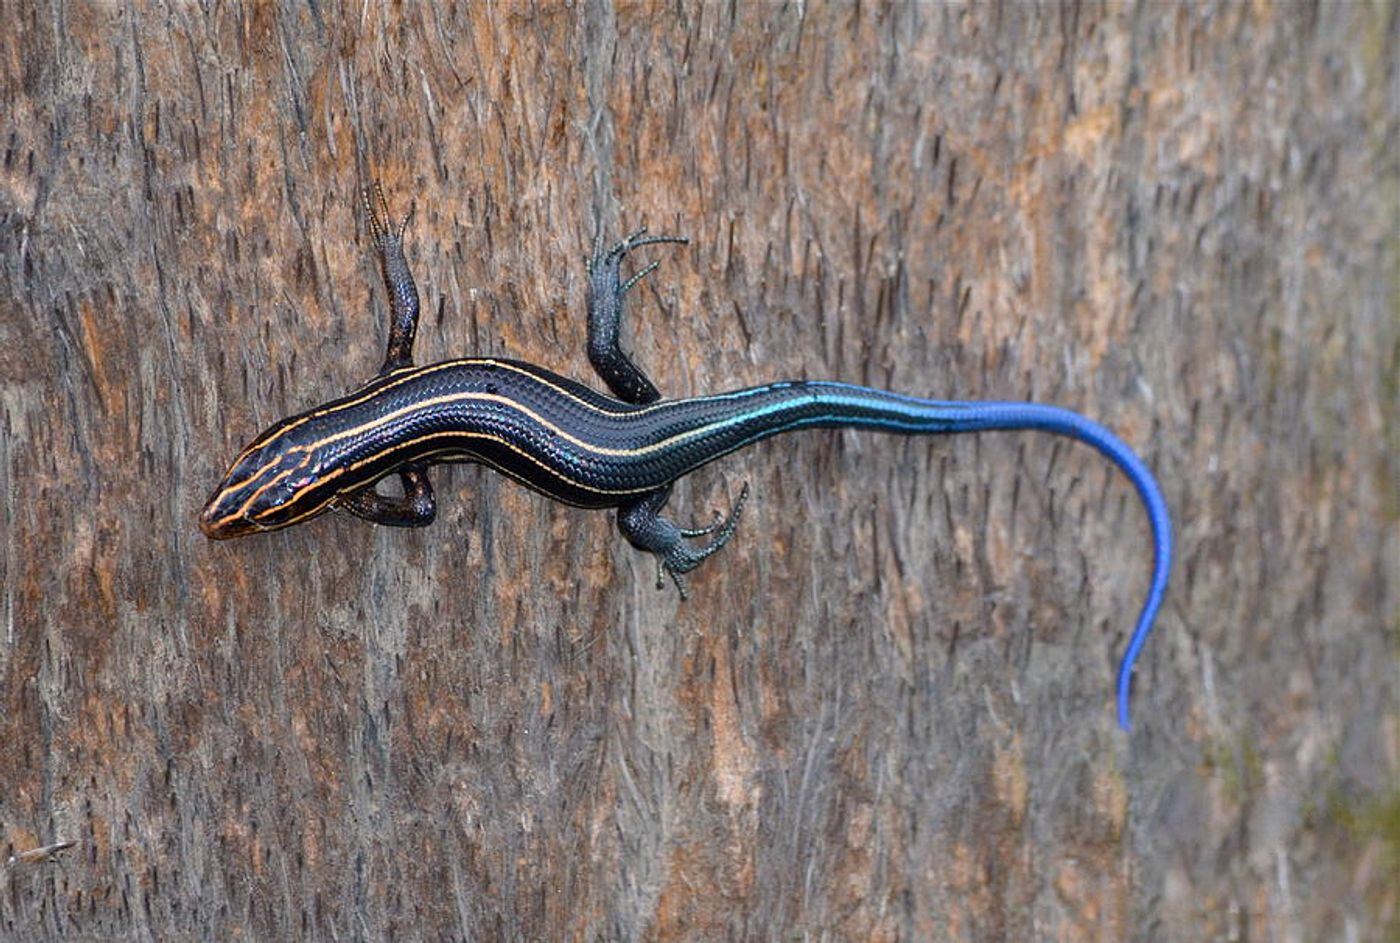 A lizard with an attractive blue tail.